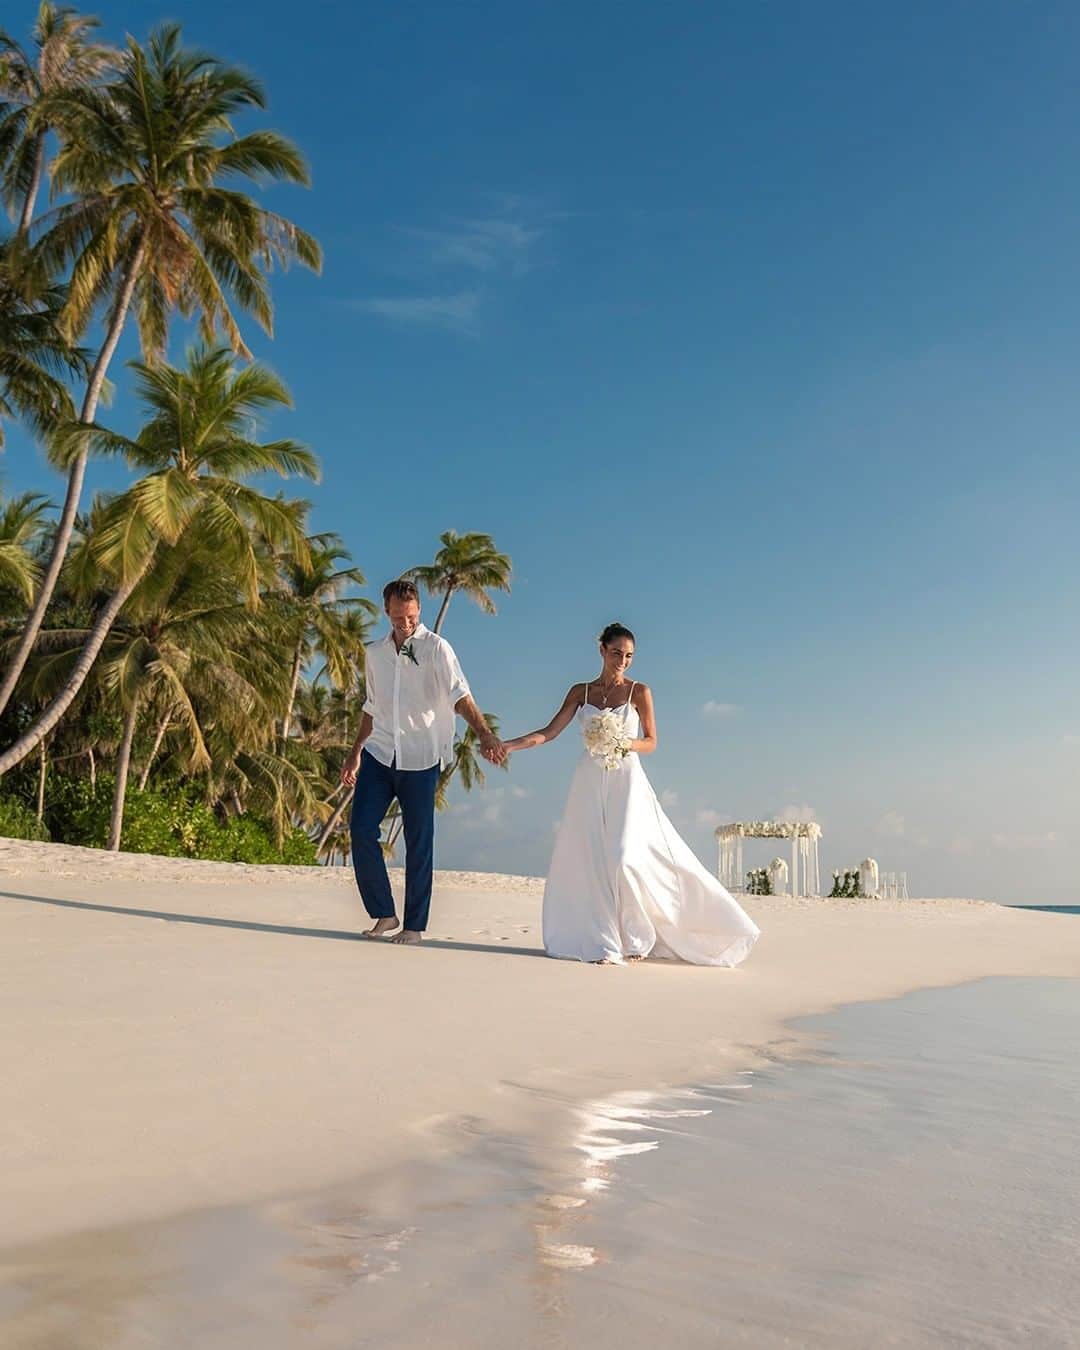 Velaa Private Islandのインスタグラム：「Where did you celebrate your 'I do' moment? #VelaaMoments #VelaaPrivateIsland」